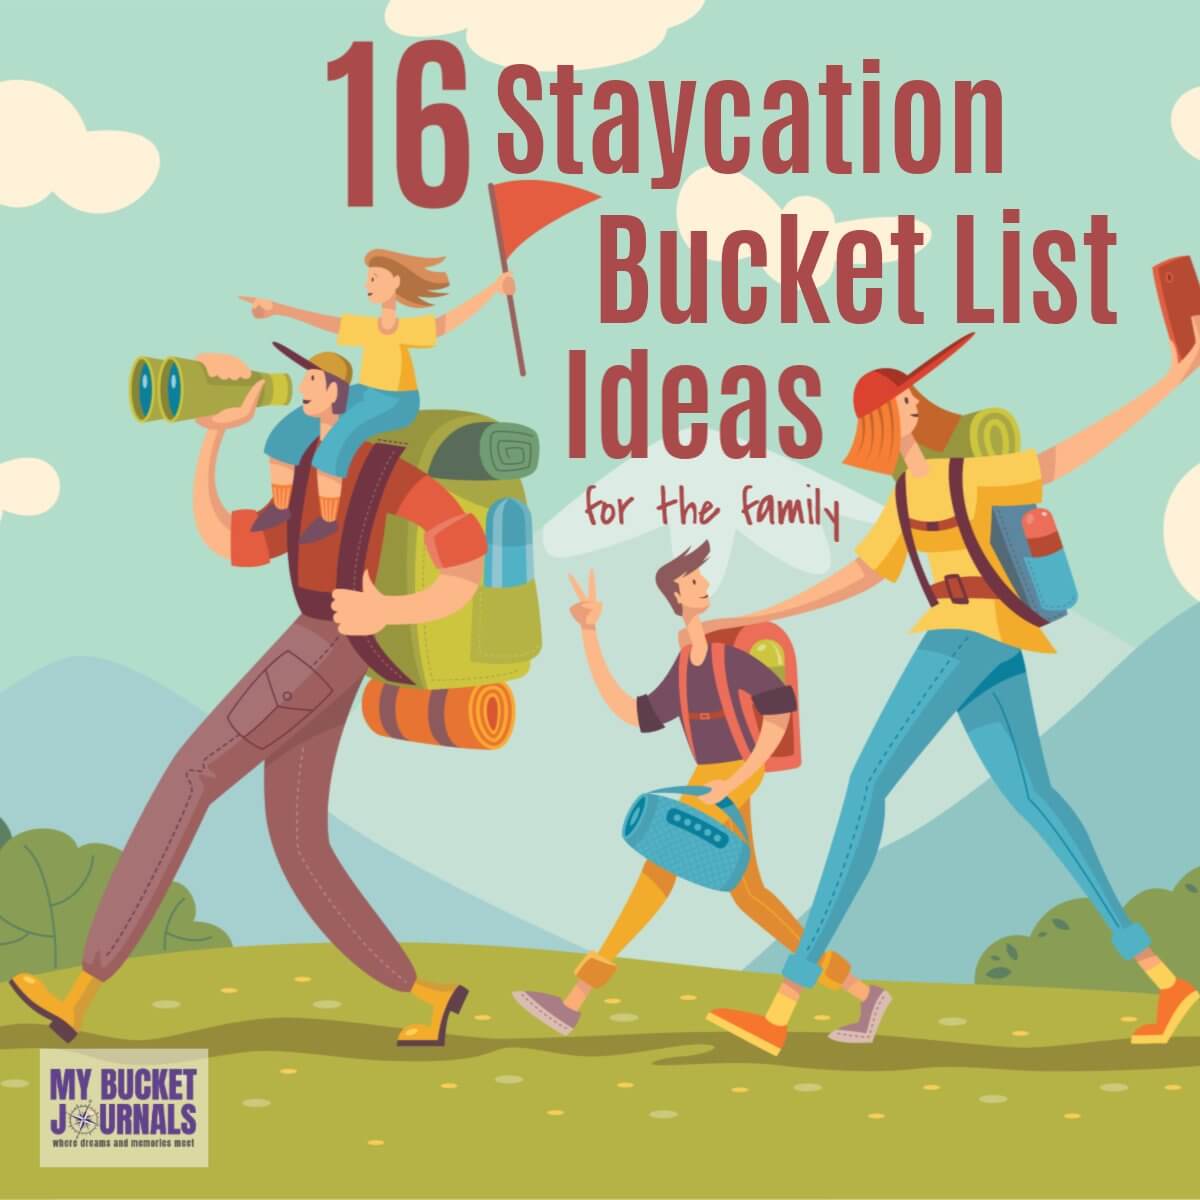 16 Staycation Bucket List Ideas for Families